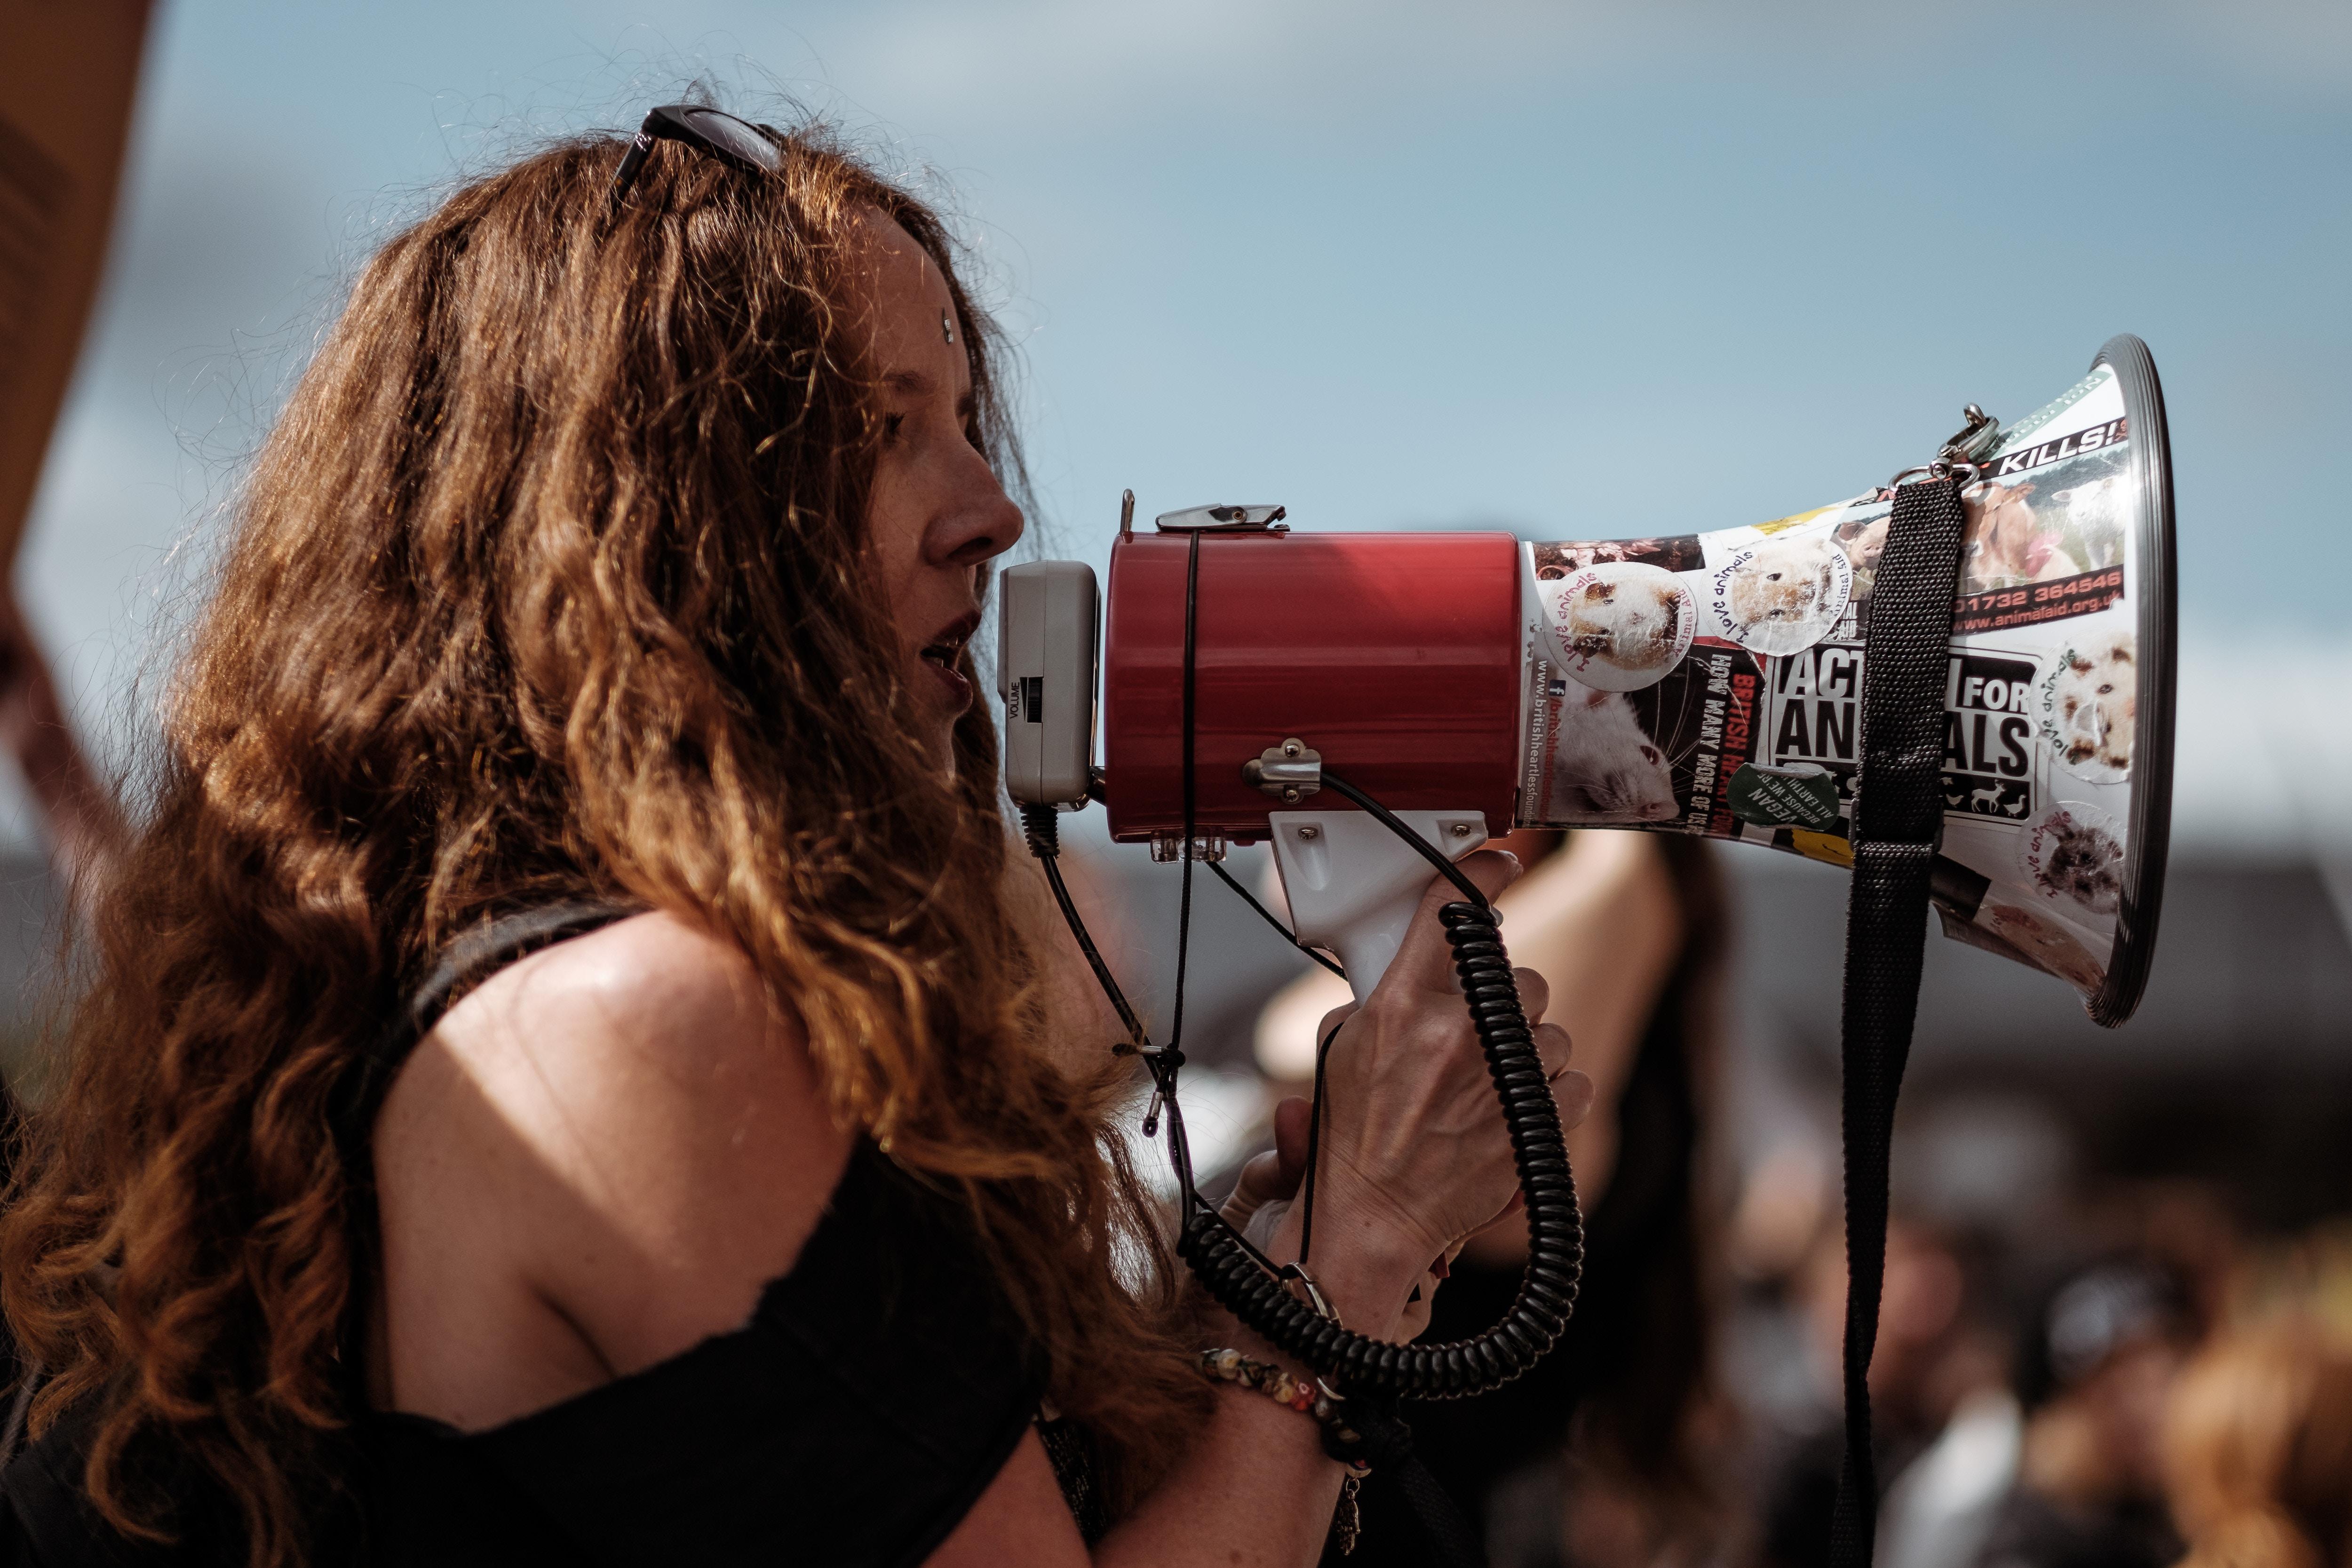 Woman speaking into a megaphone at a protest.